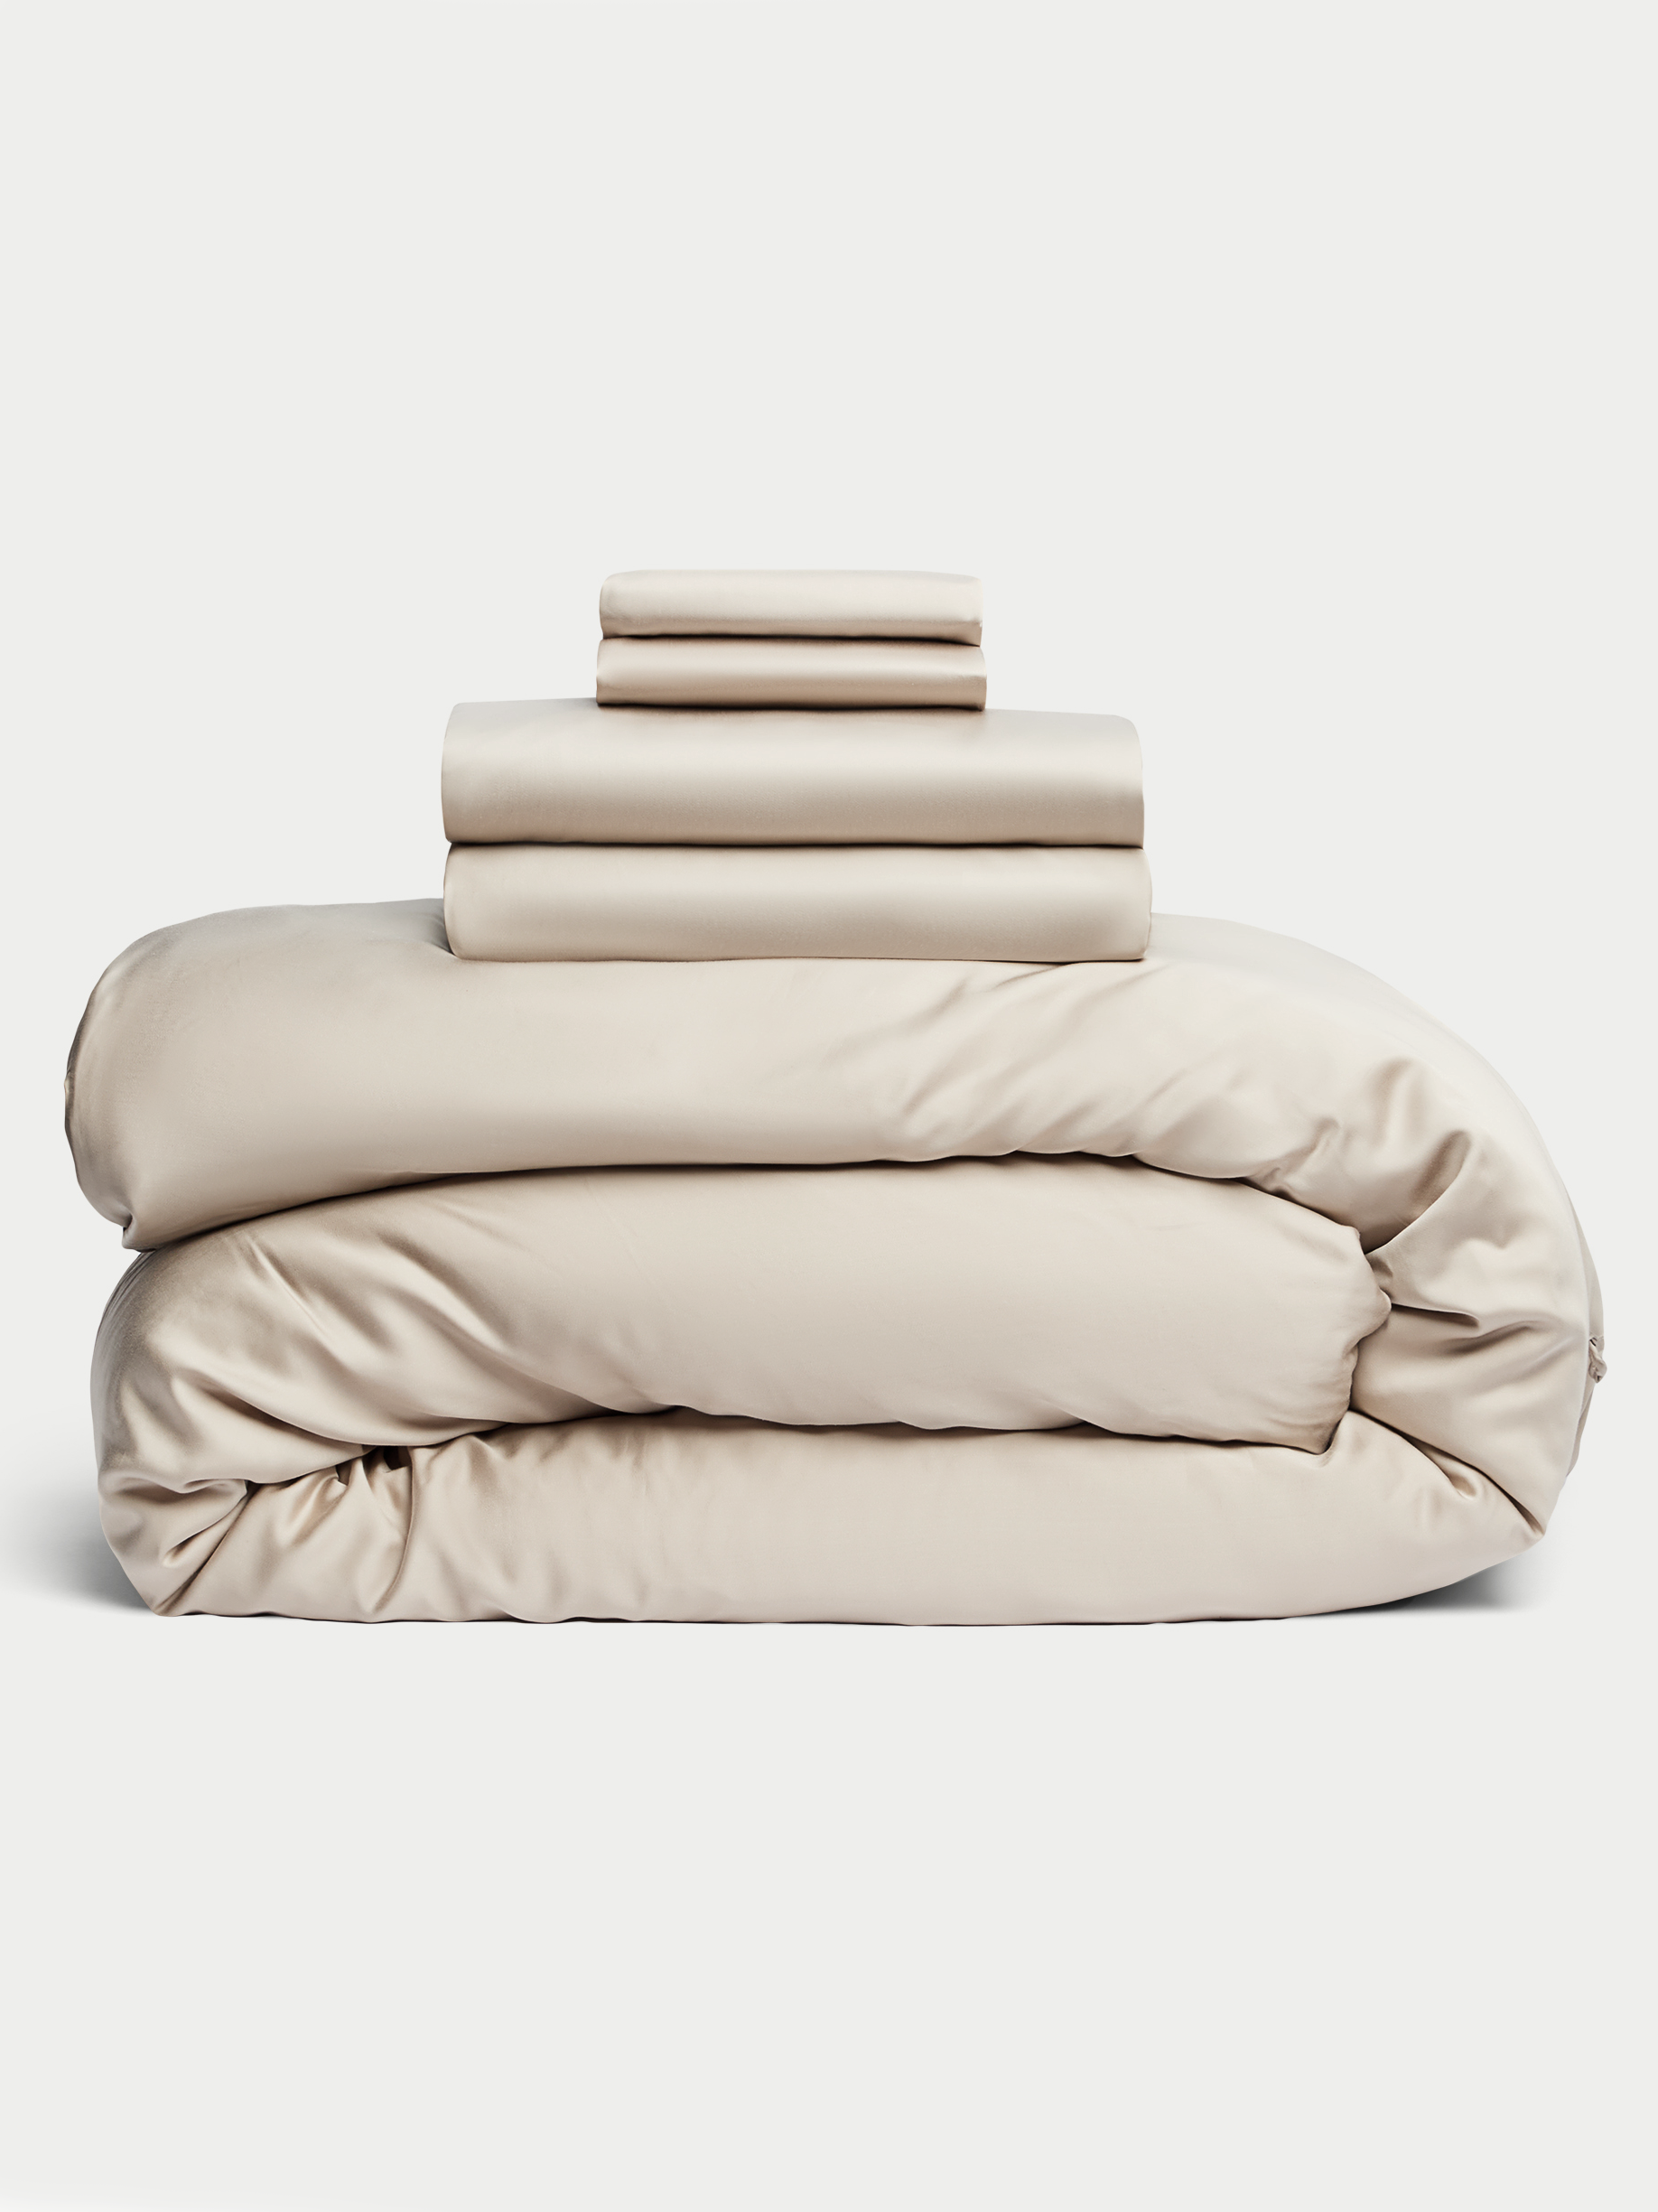 Driftwood bedding bundle stacked up with white background |Color:Driftwood